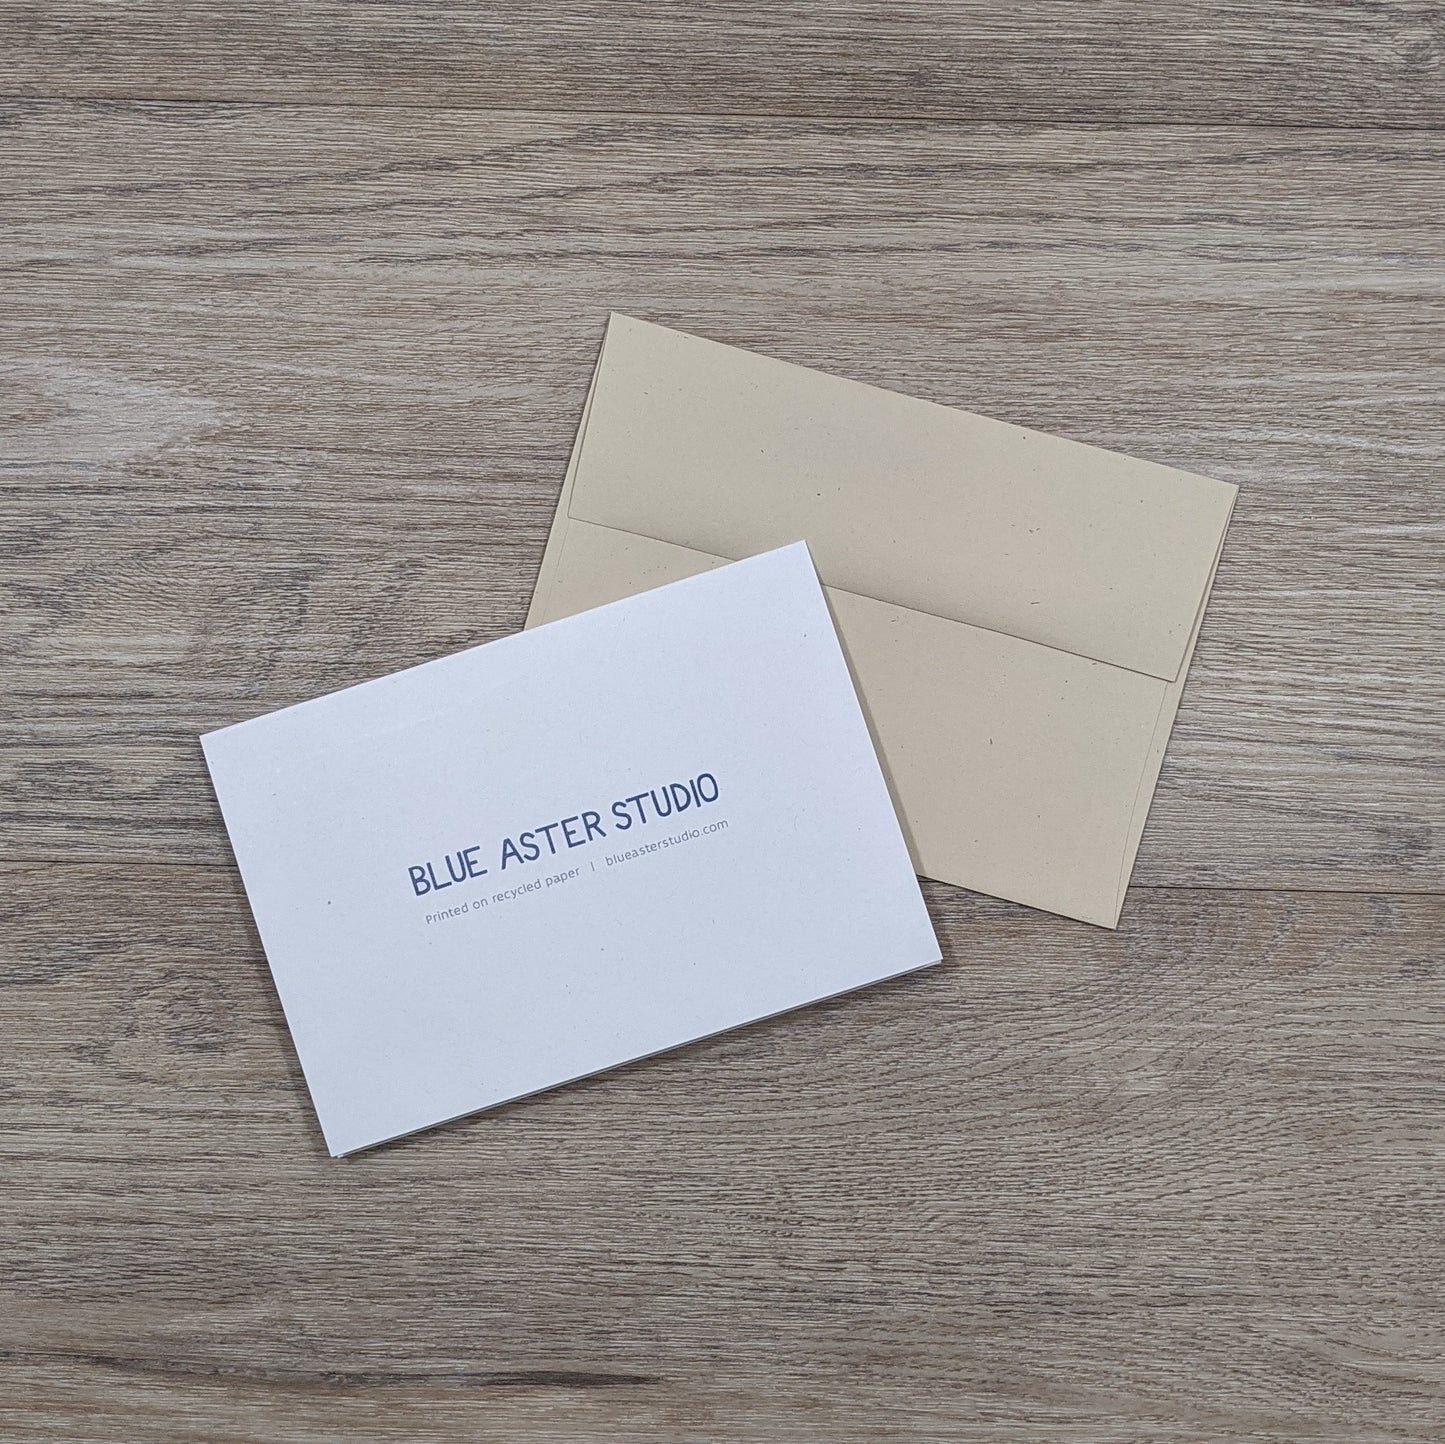 The back of the turtle card showing the Blue Aster Studio logo, website address, and that the cards are printed on recycled paper. This is sitting next to the natural speckled brown envelope.